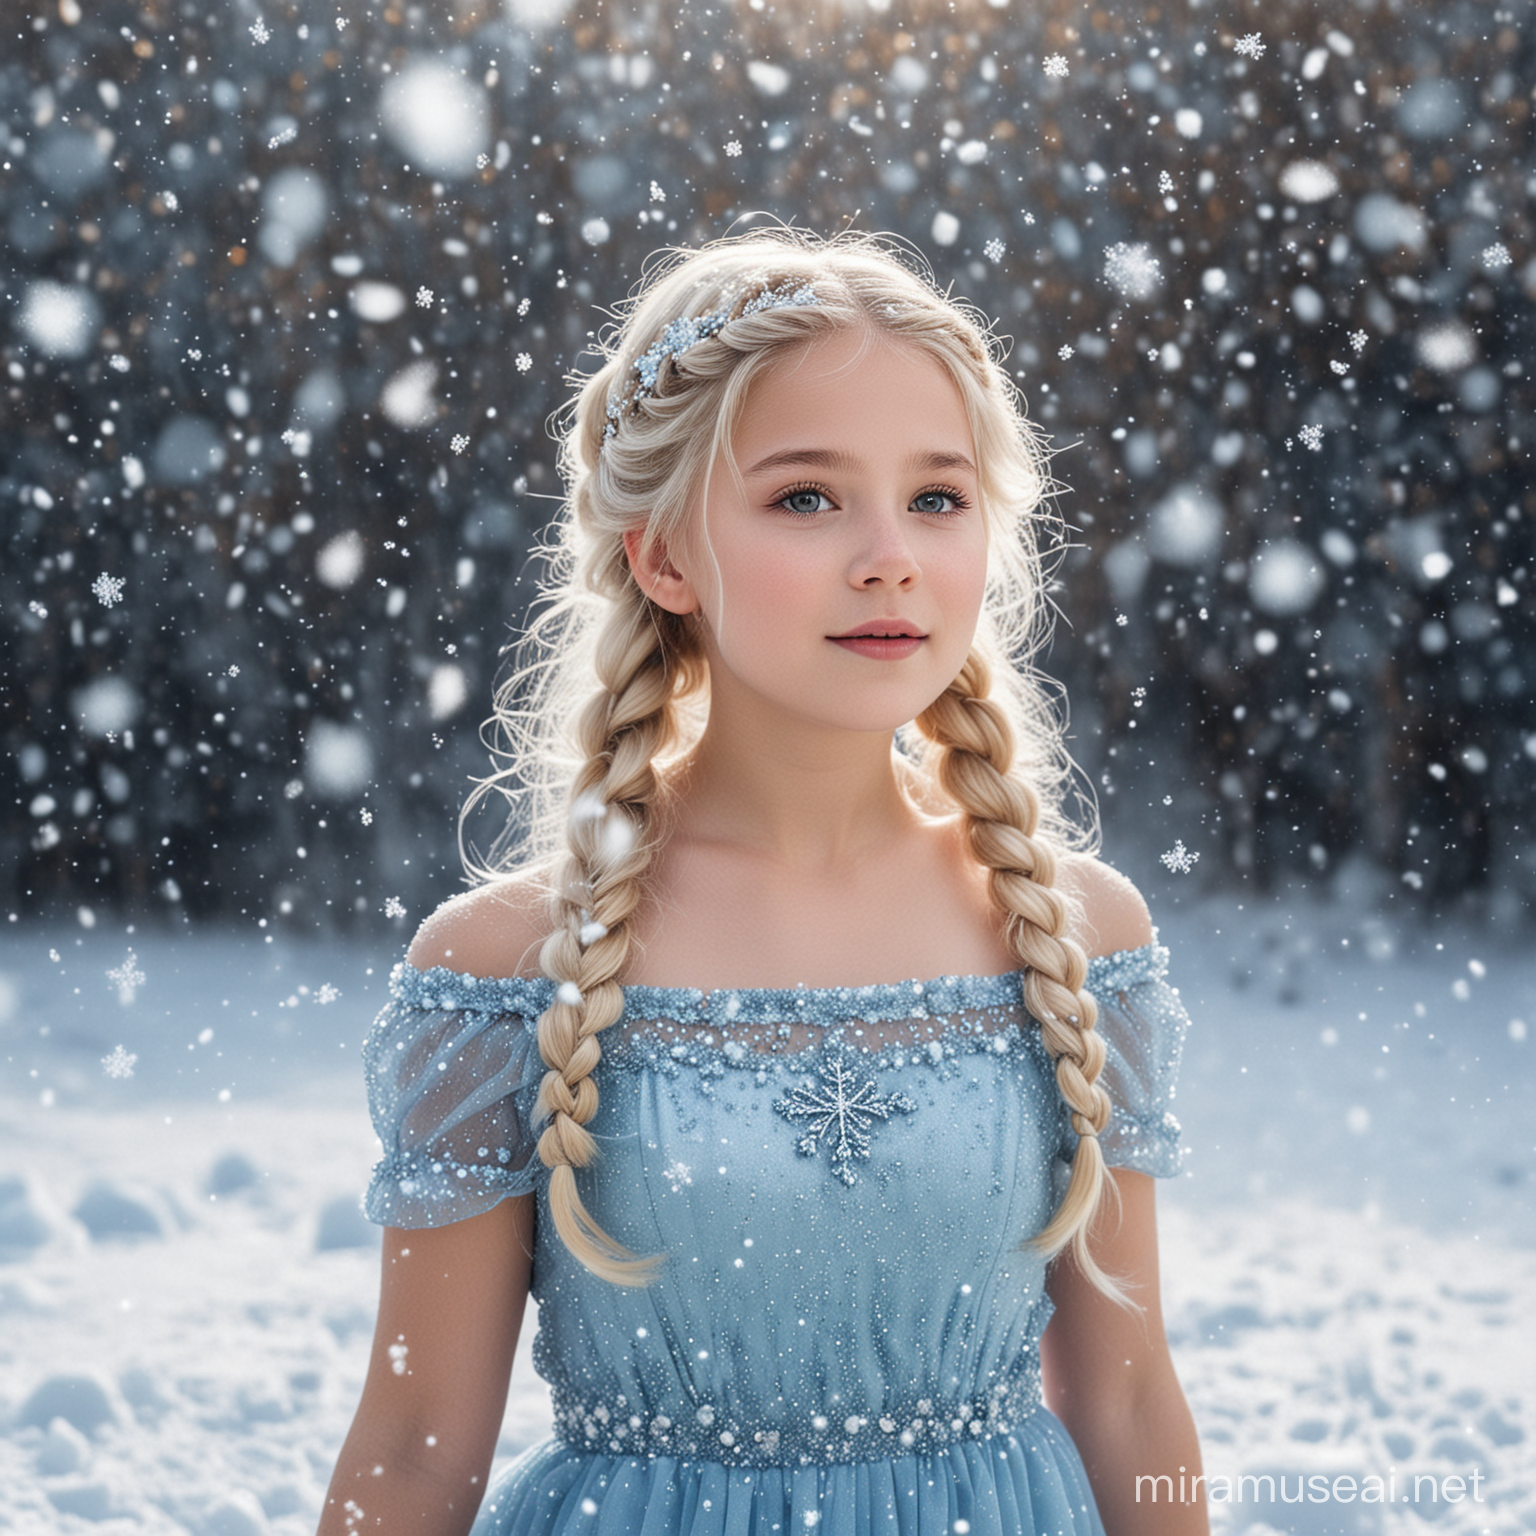 Magical Snow Queen Little Girl Playing with Snowflakes in Glittery Blue Dress